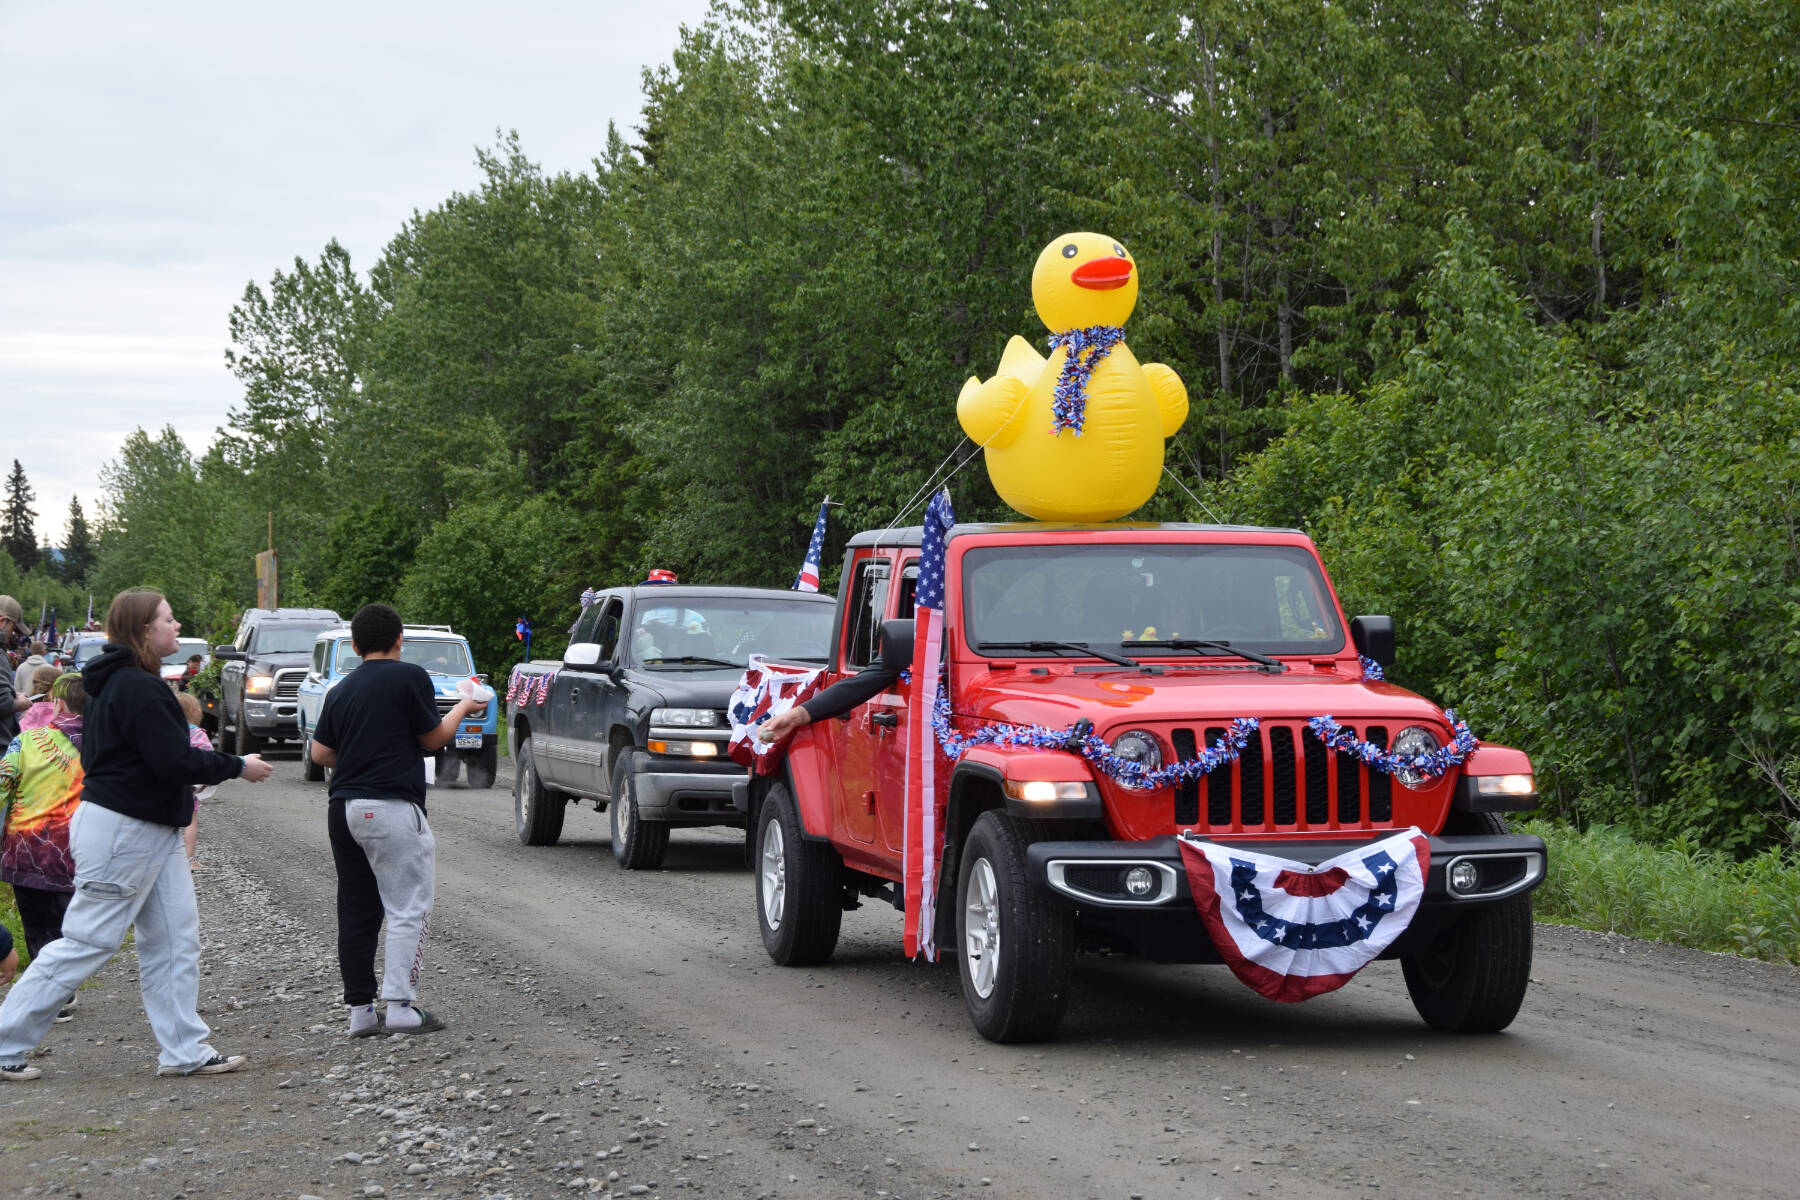 Parade participants pass out candy and spectators hand out watermelon slices during the Anchor Point Fourth of July parade on Tuesday, July 4, 2023 in Anchor Point, Alaska. (Delcenia Cosman/Homer News)